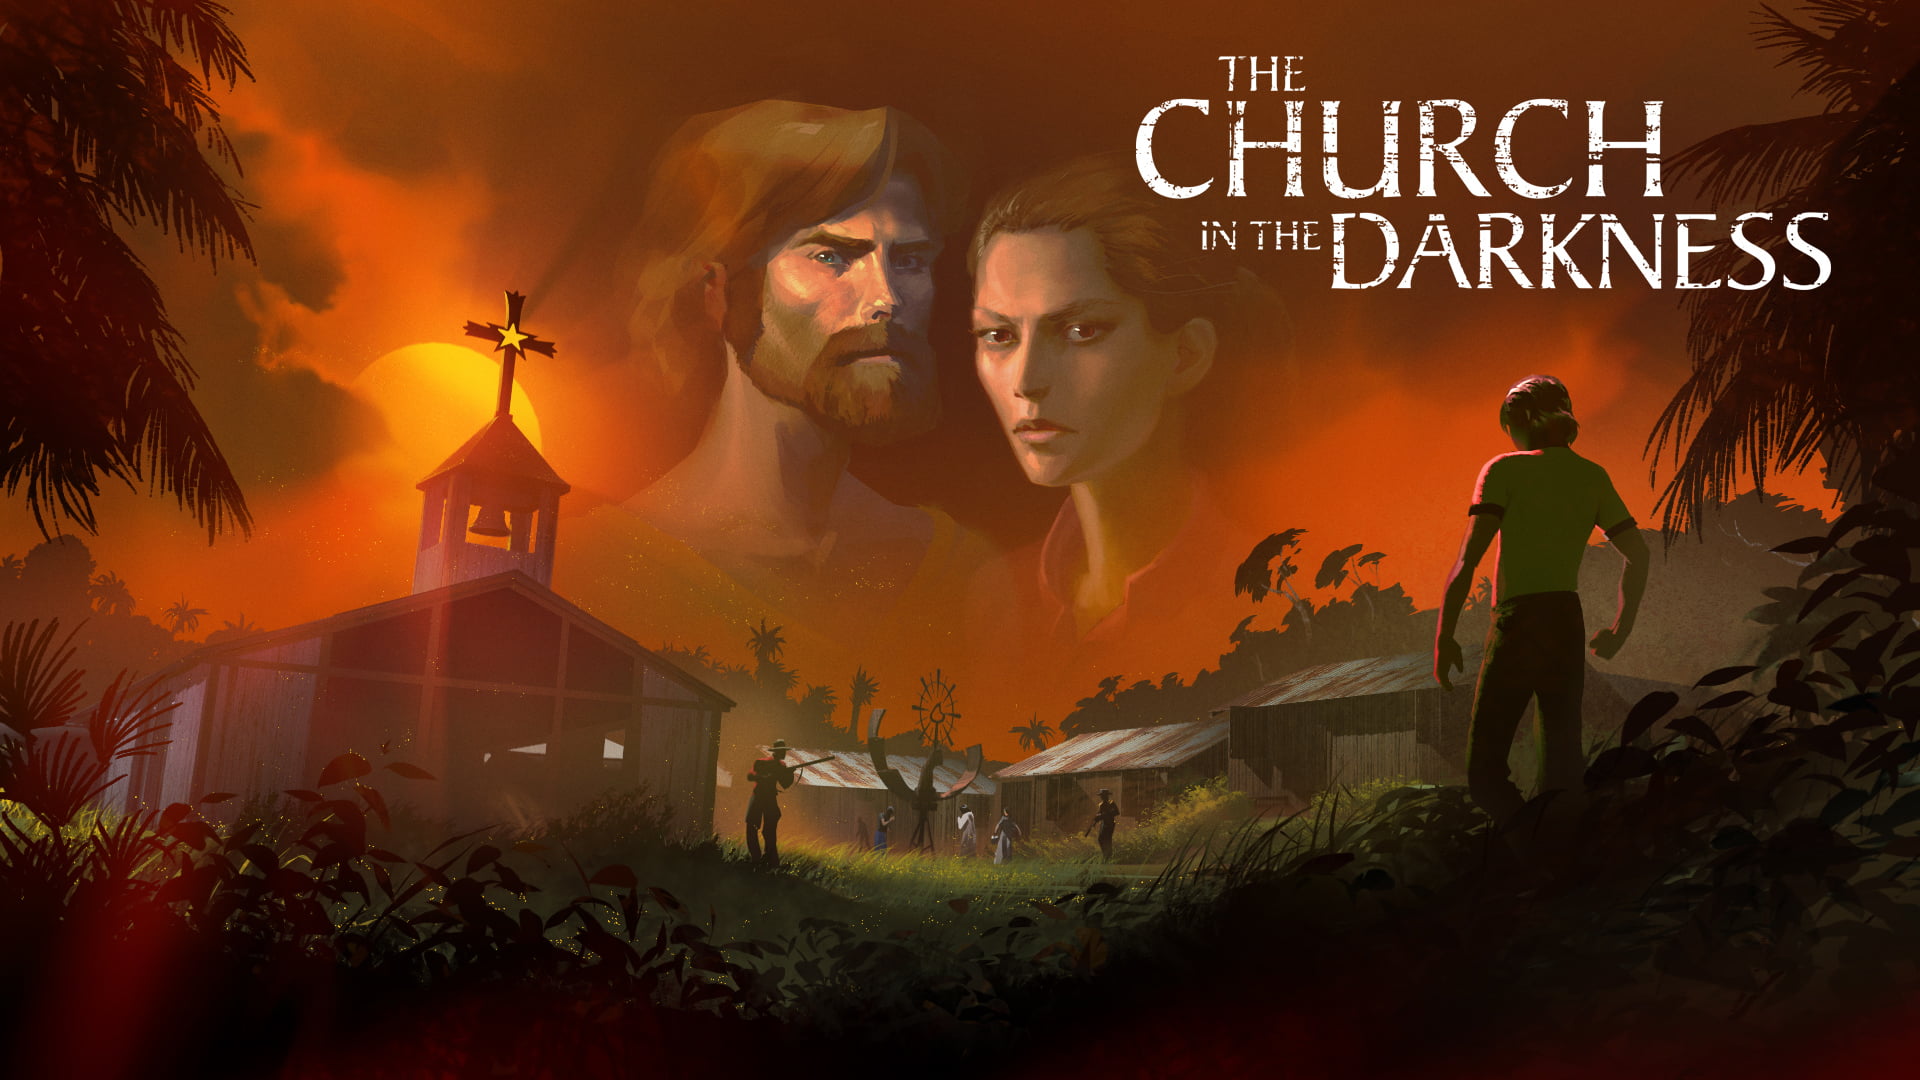 The witcher: monster slayer | the church in the darkness - review | the church in the darkness | notícias